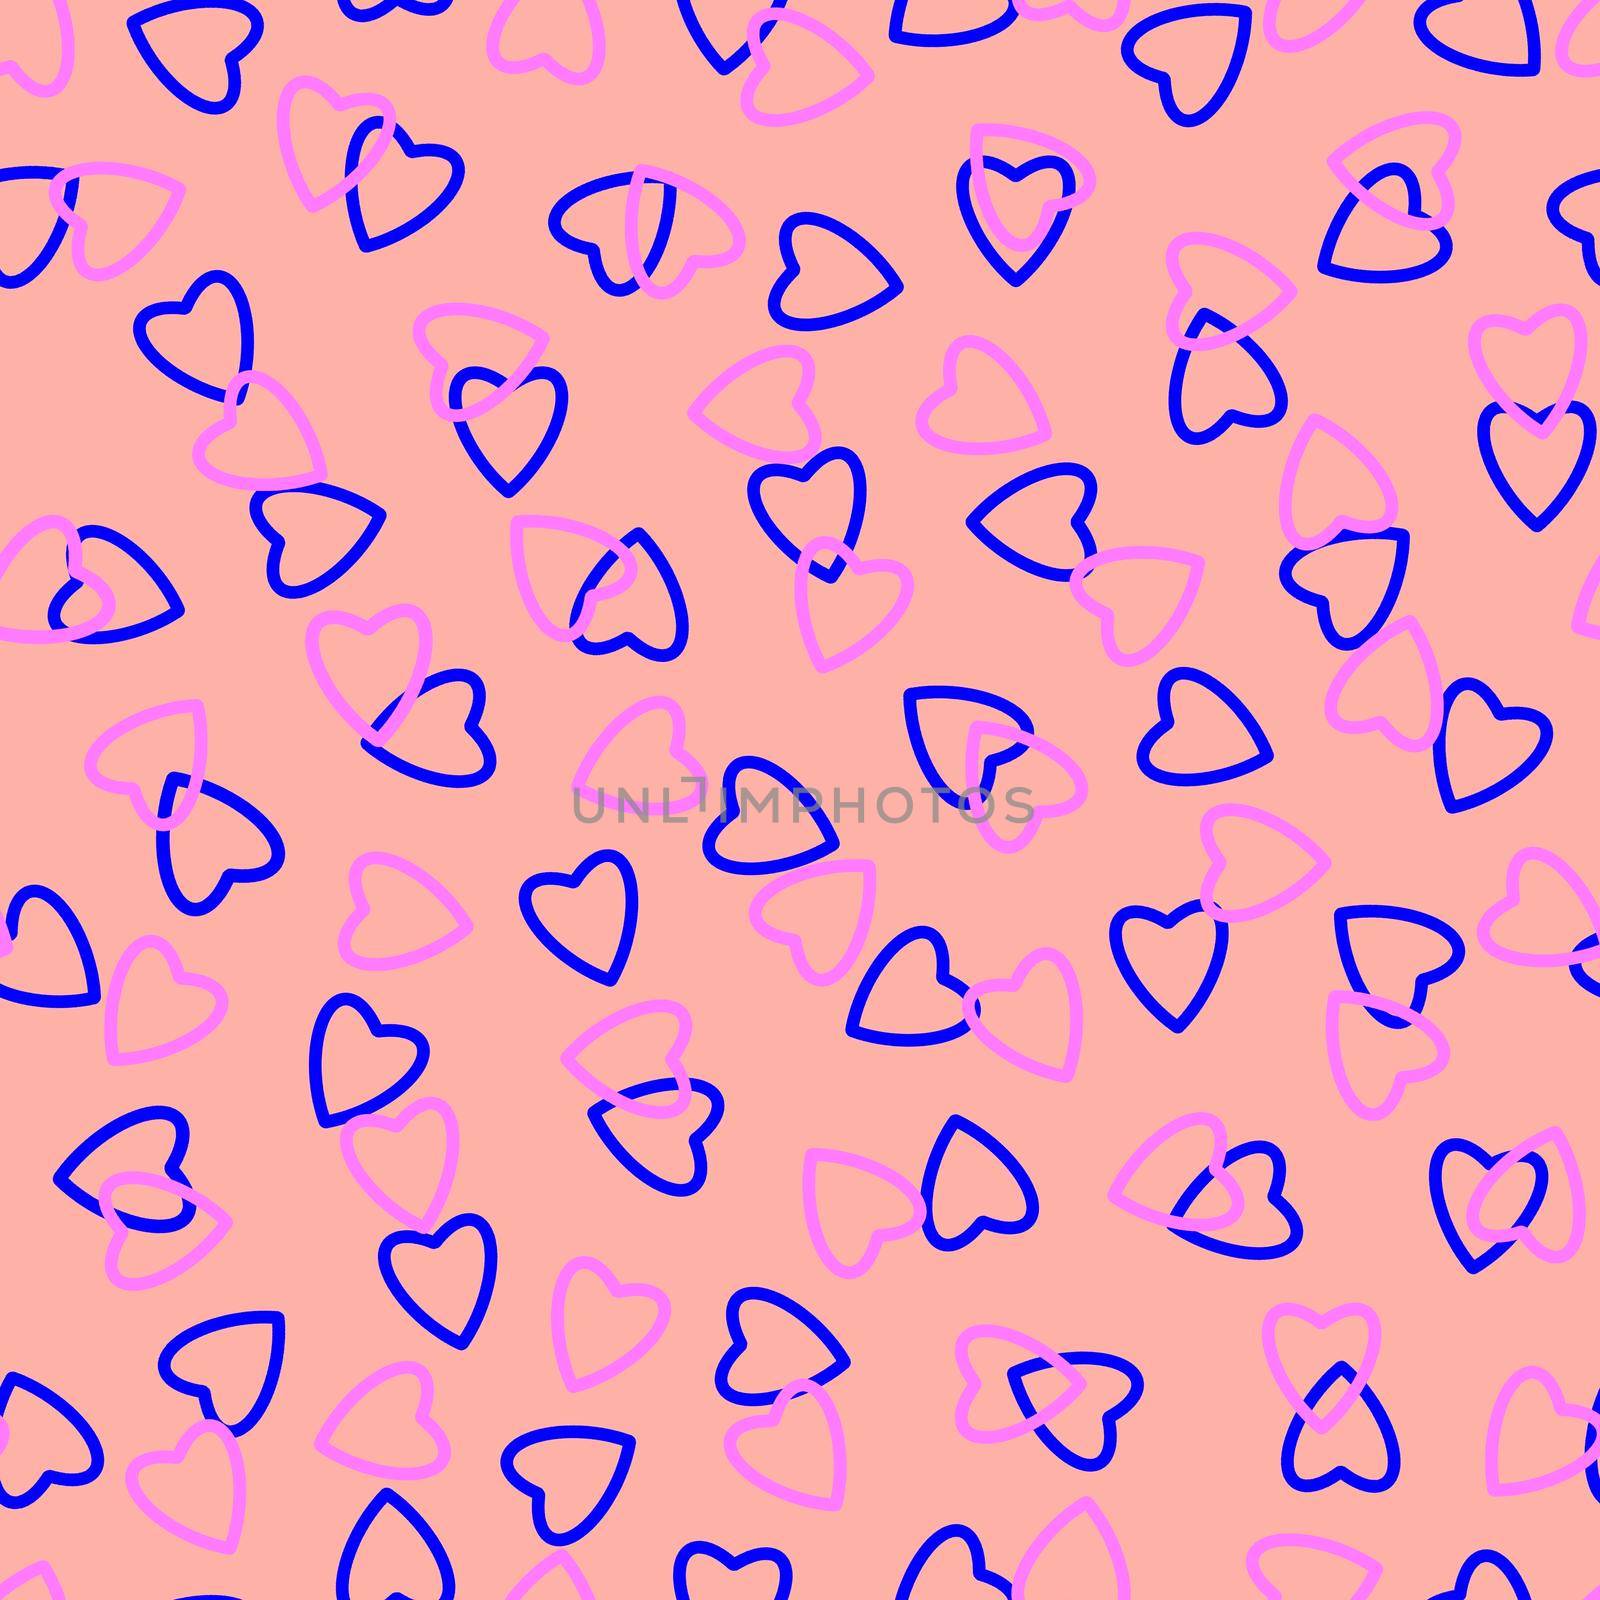 Simple hearts seamless pattern,endless chaotic texture made of tiny heart silhouettes.Valentines,mothers day background.Blue,lilac,peach.Great for Easter,wedding,scrapbook,gift wrapping paper,textiles